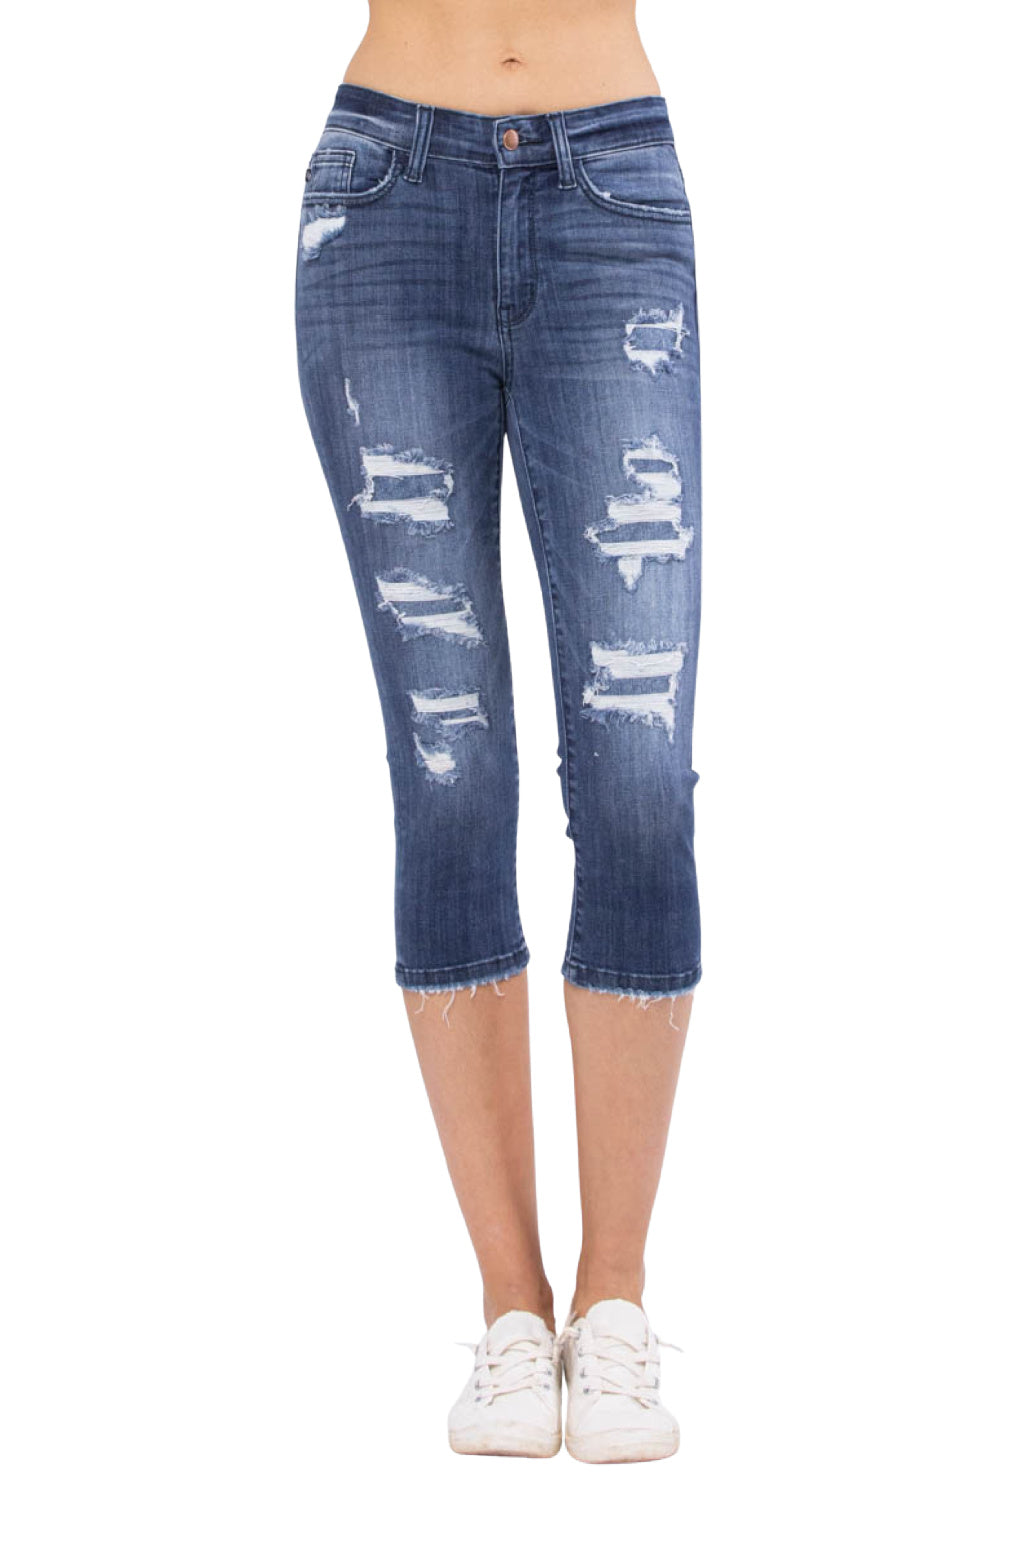 Judy Blue Contrast Patch Mid-Rise Skinny Capris Style 82271